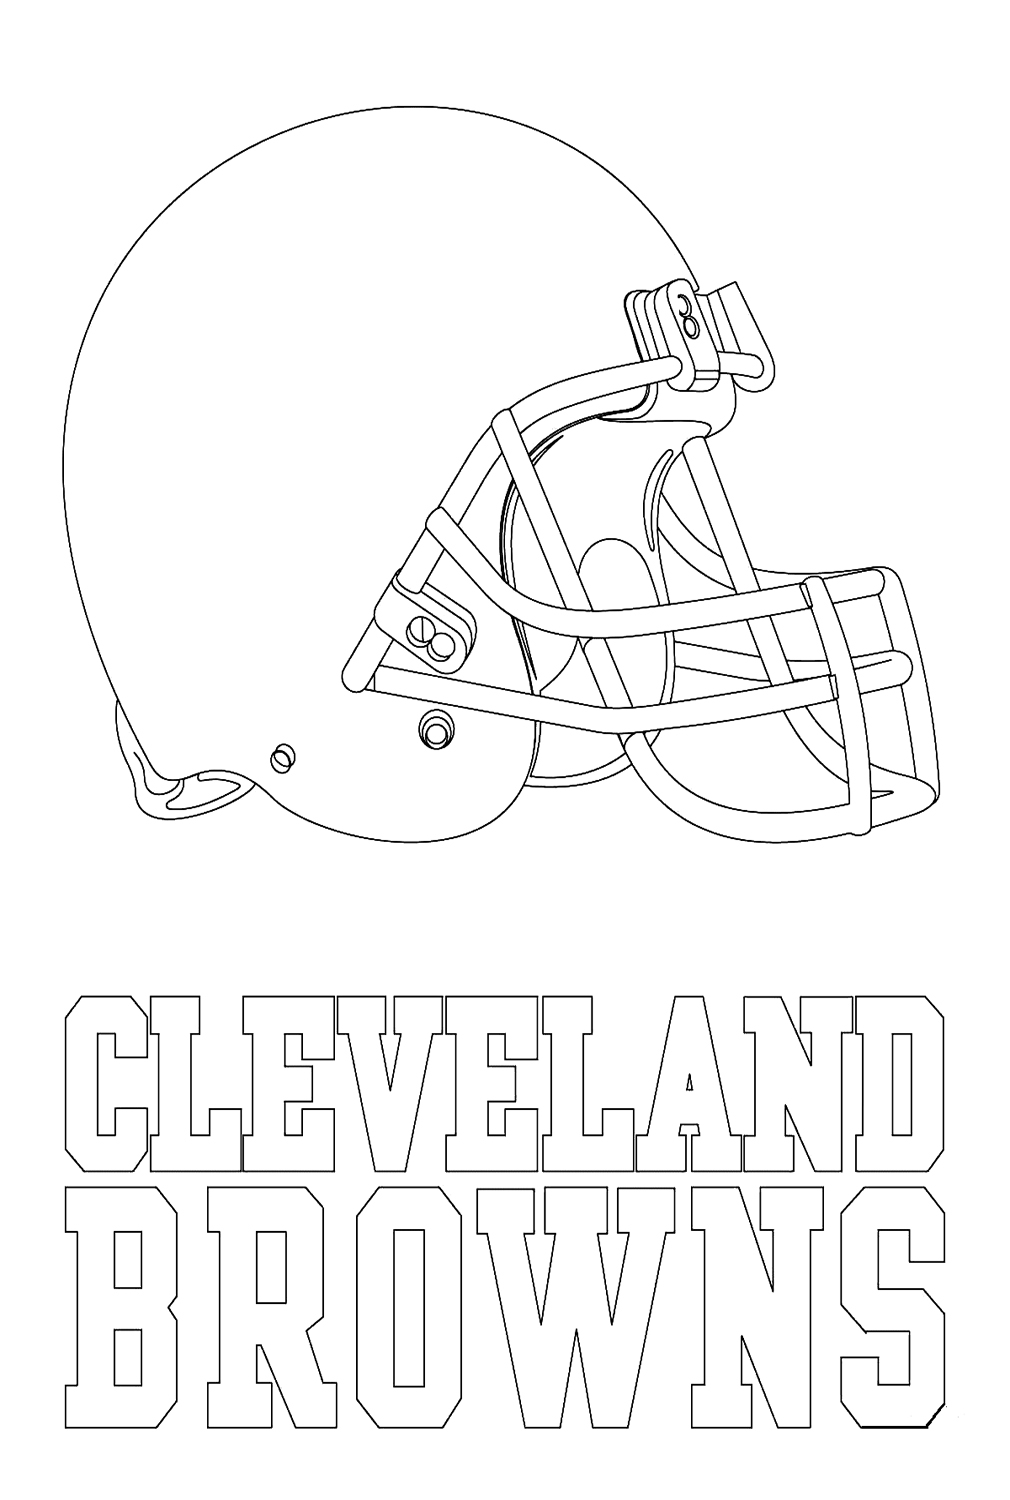 Cleveland Browns Logo from NFL